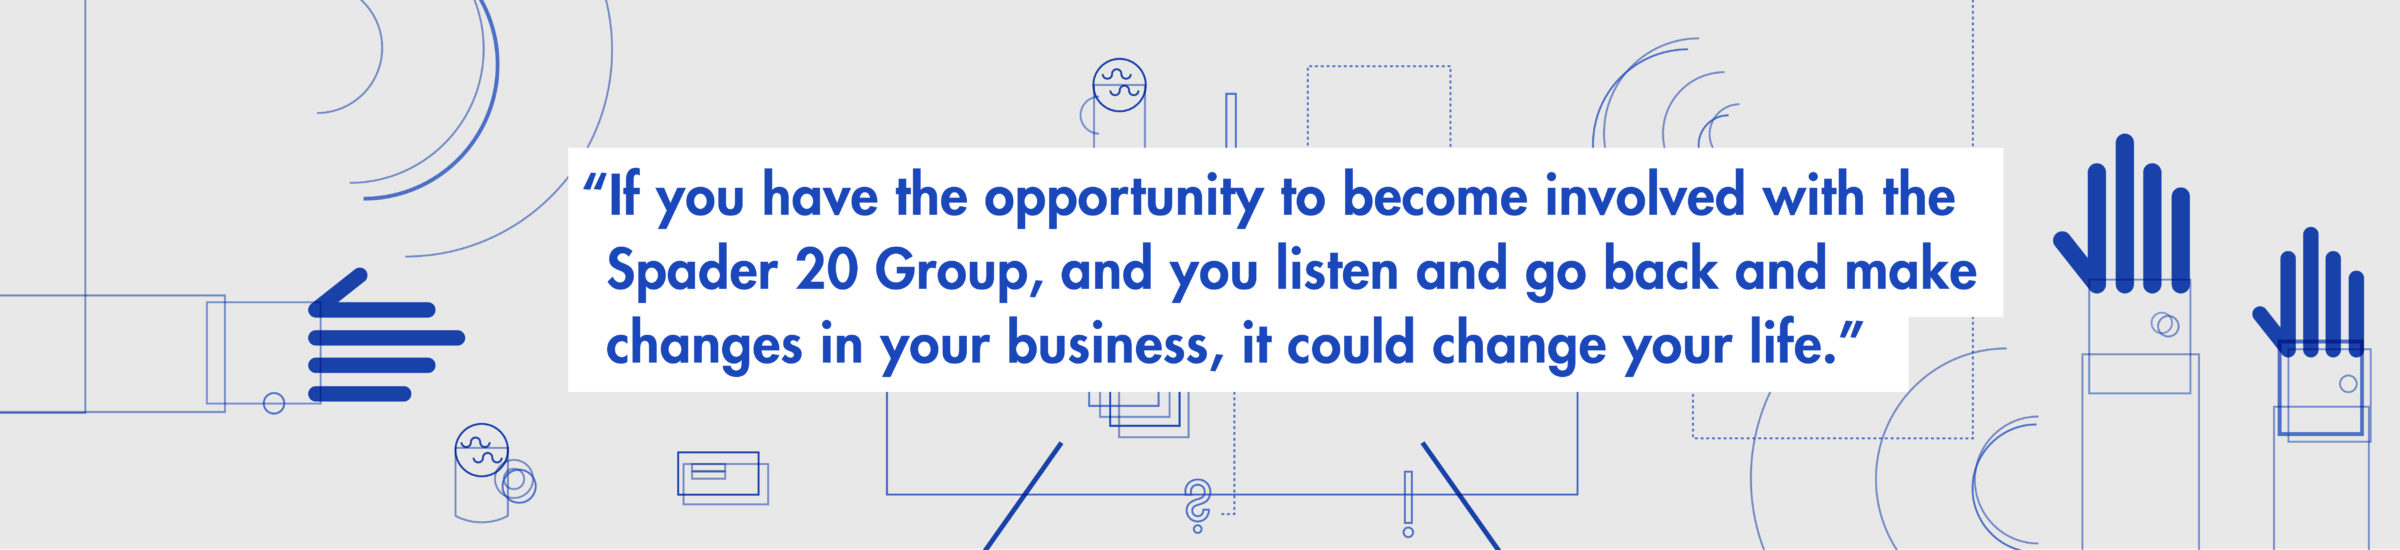 "If you have the opportunity to become involved with the Spader 20 Group, and you listen and go back and make changes in your business, it could change your life."